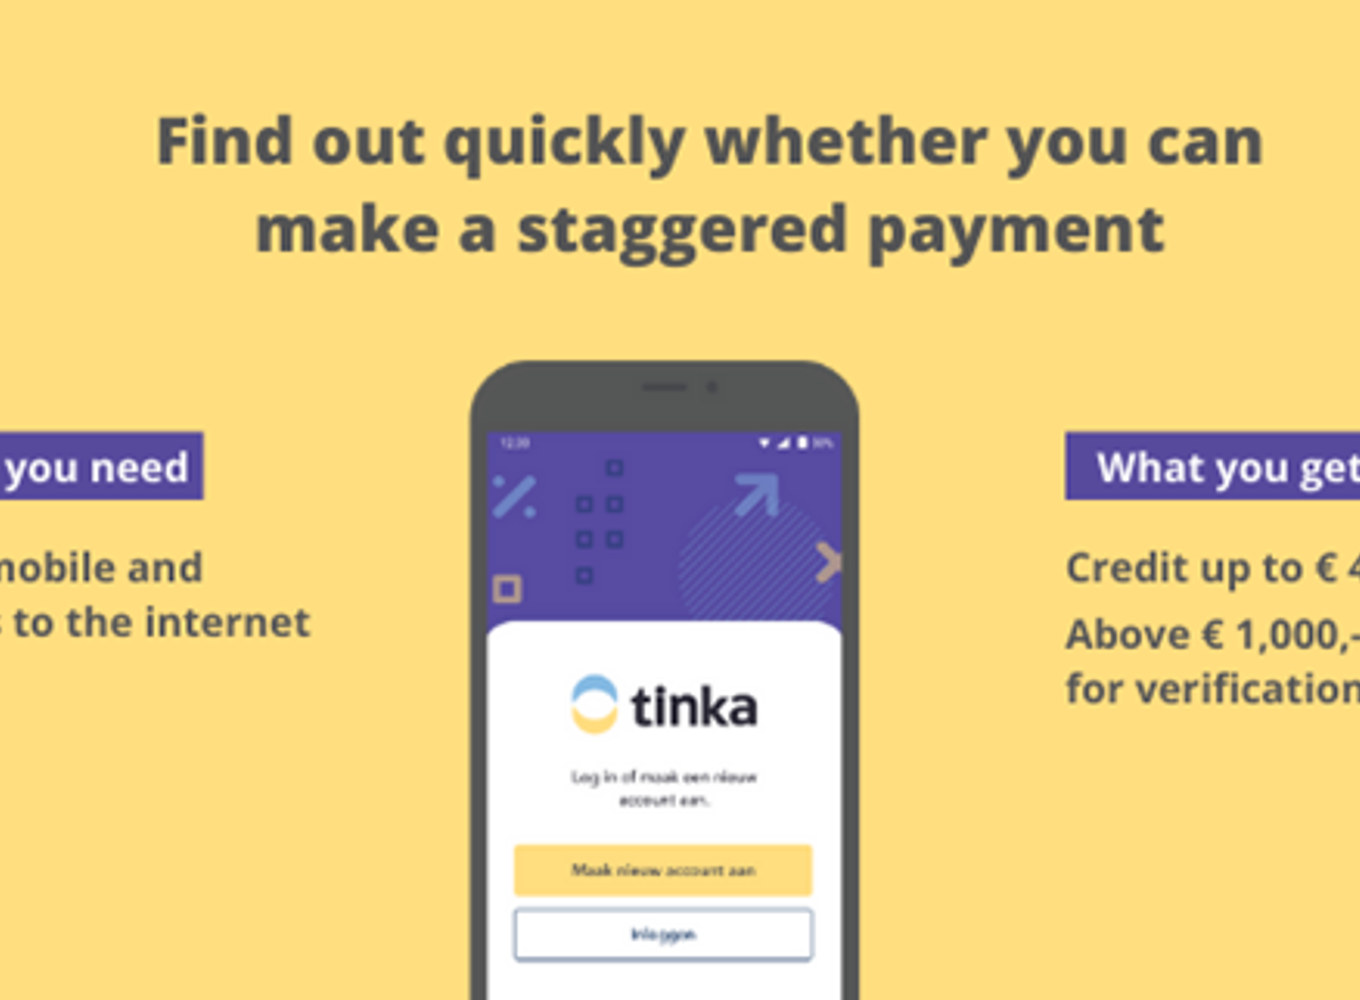 Find out whether you can make a staggered payment